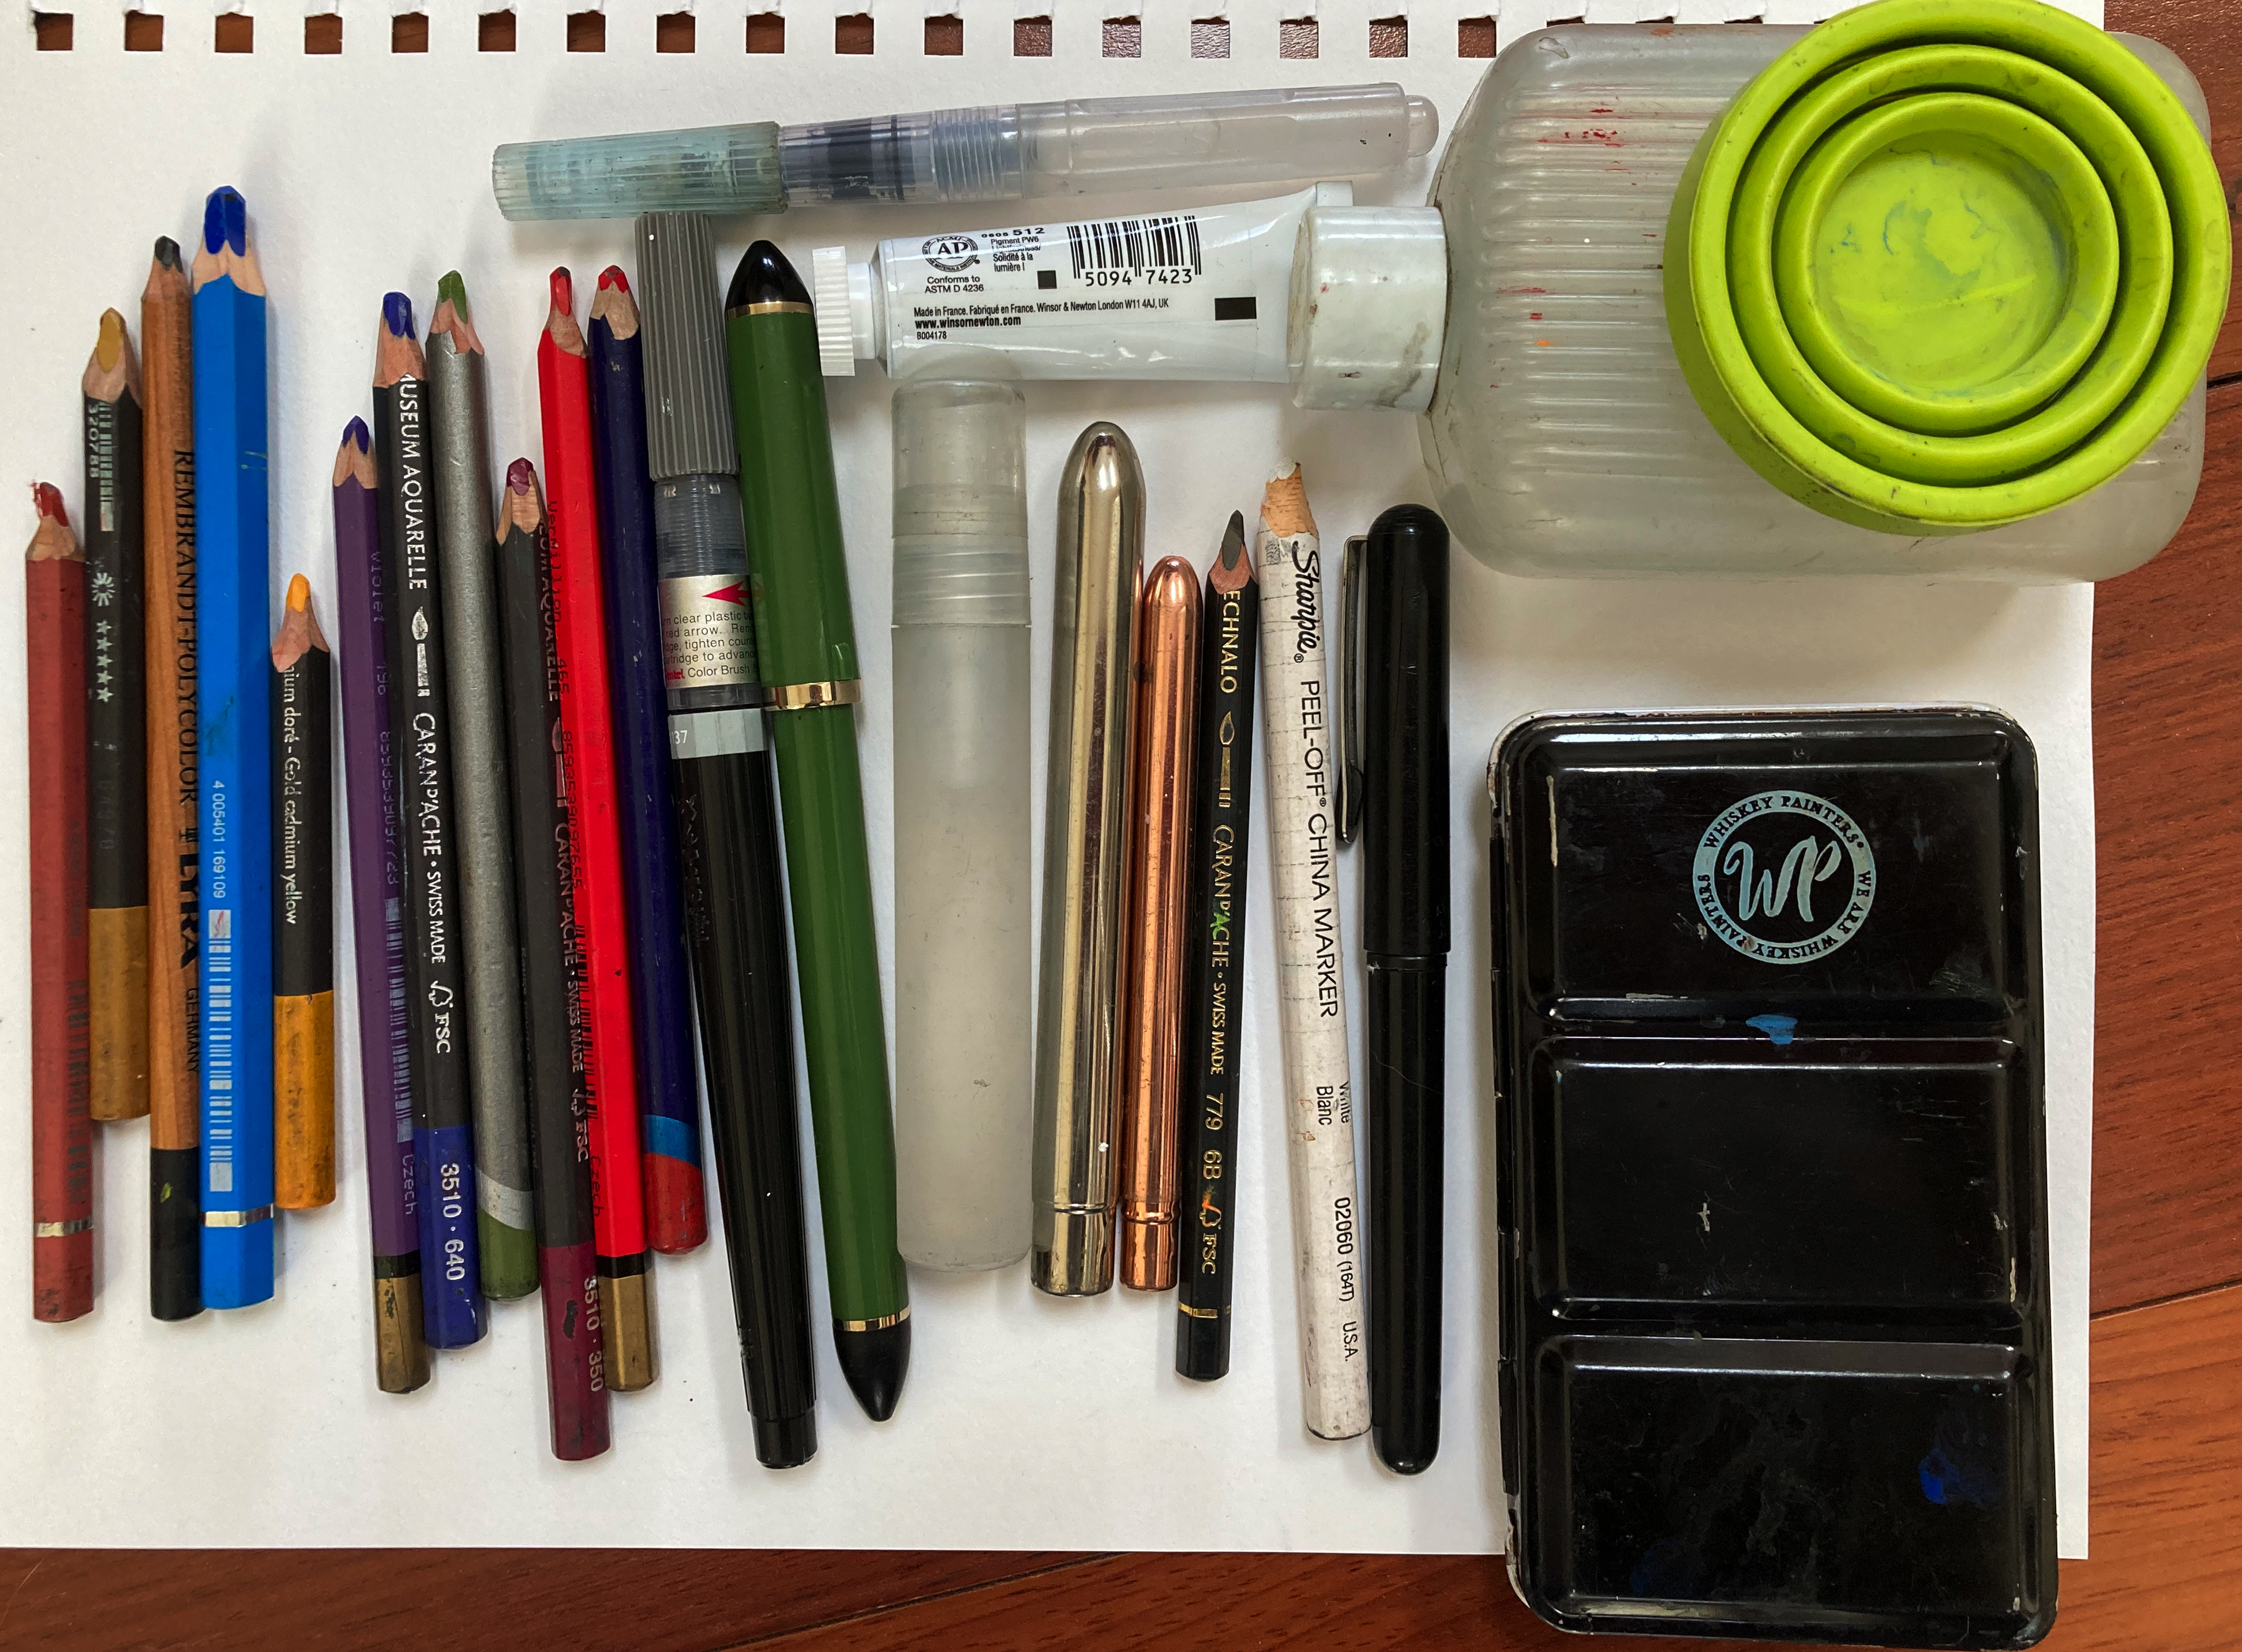 Sketchbook Supplies and Tools (and a few thoughts)